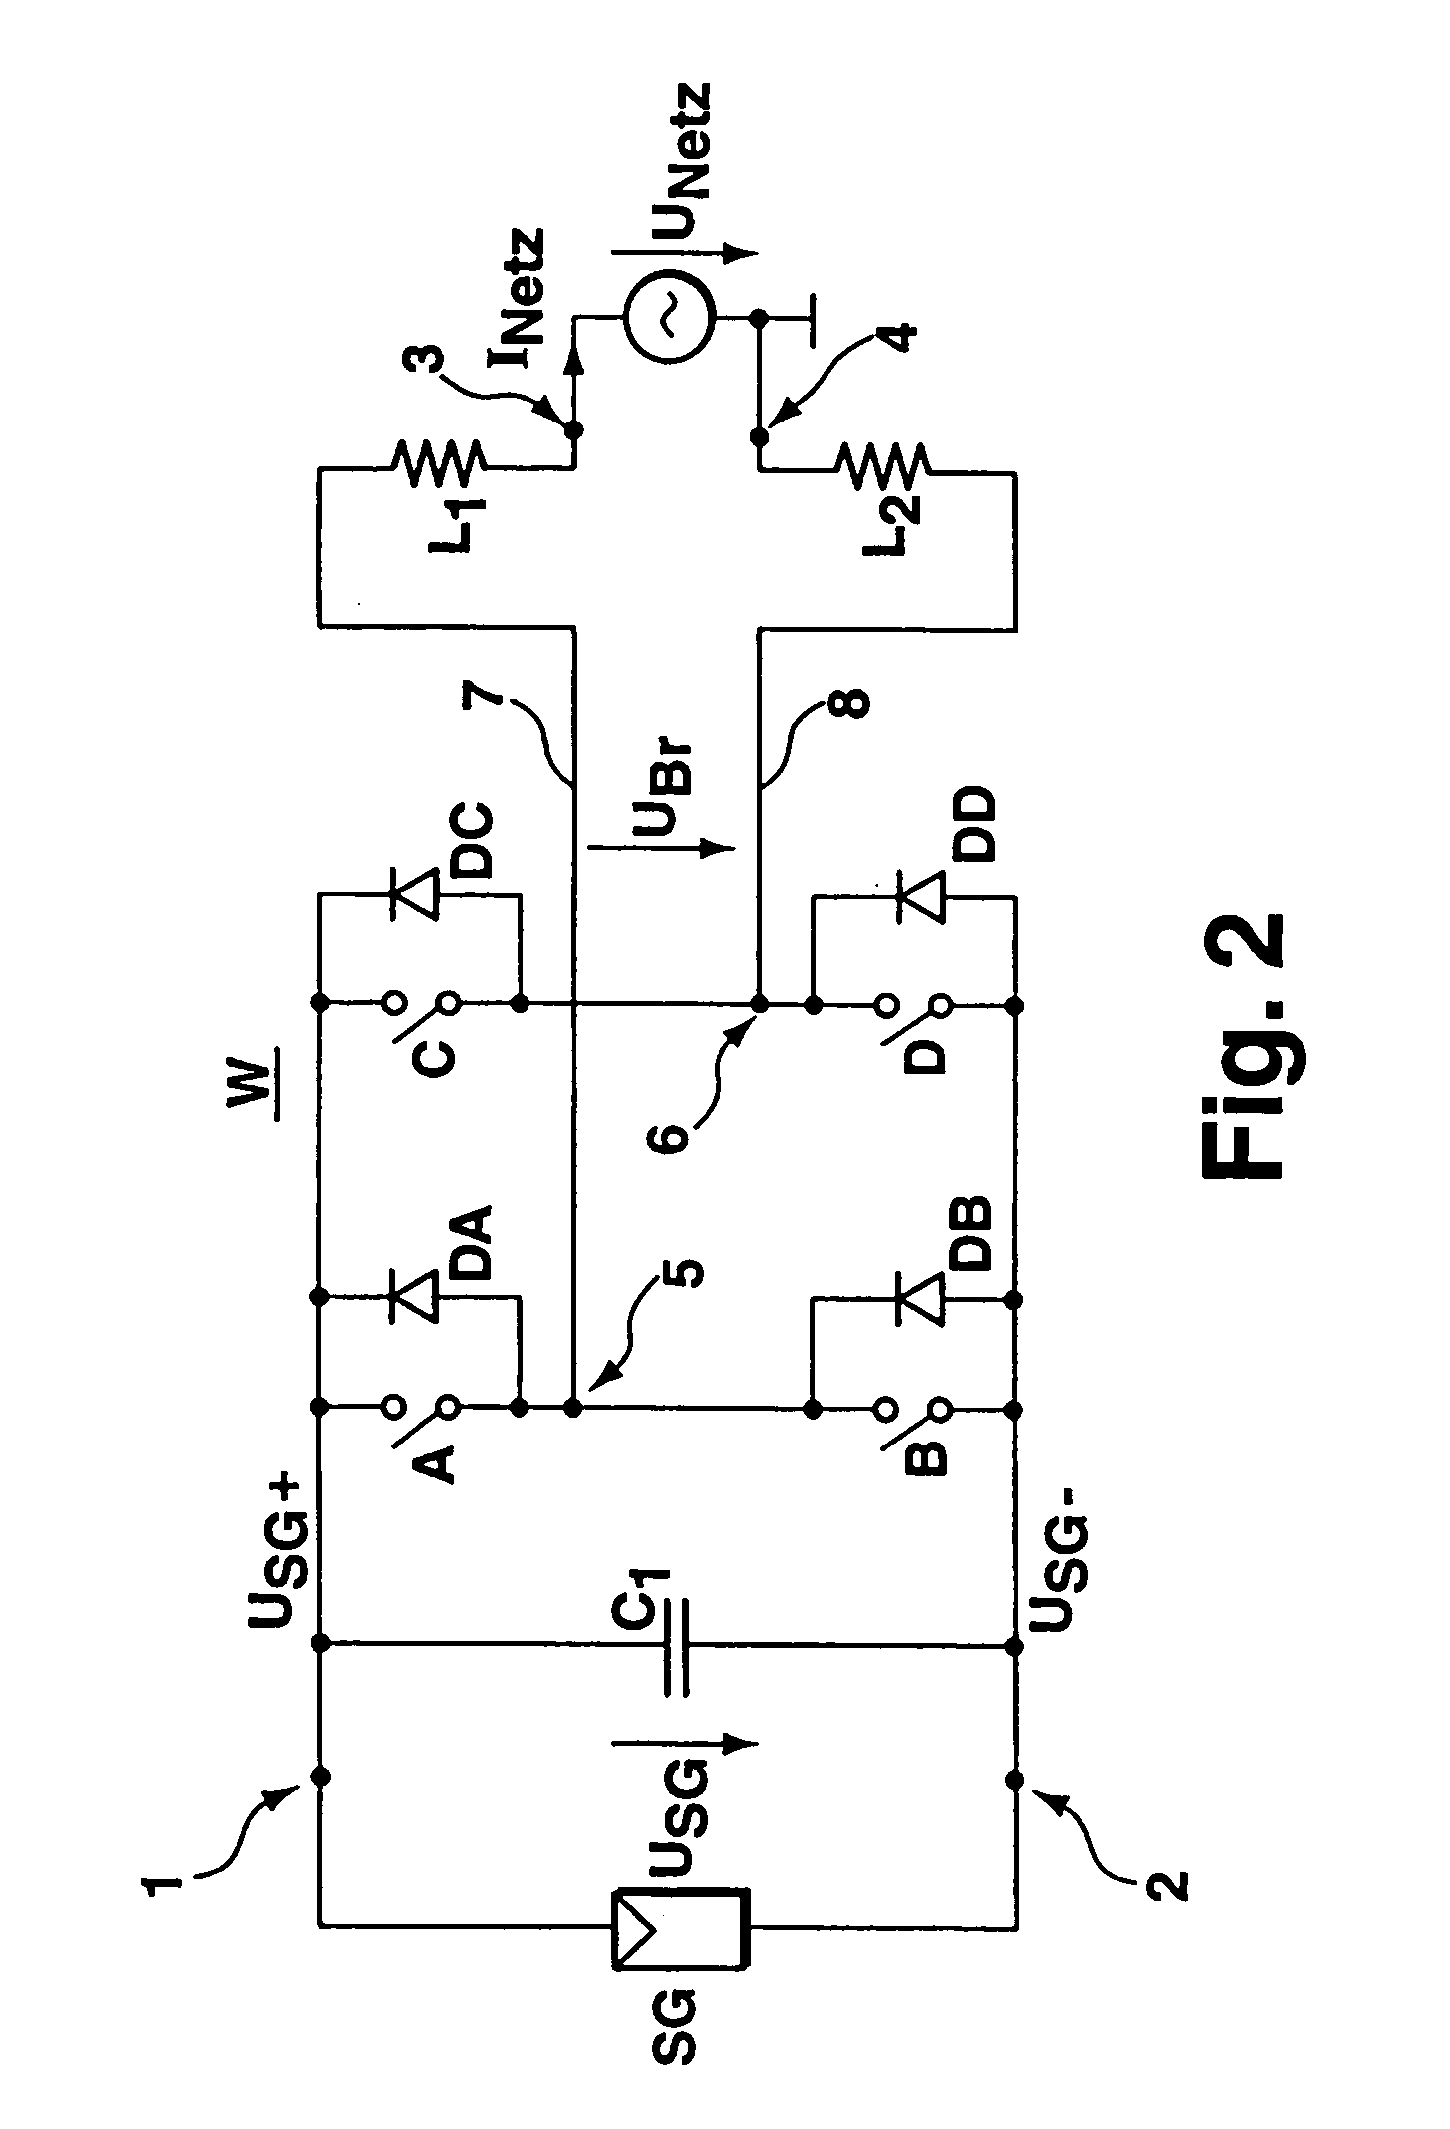 DC/AC converter to convert direct electric voltage into alternating voltage or into alternating current